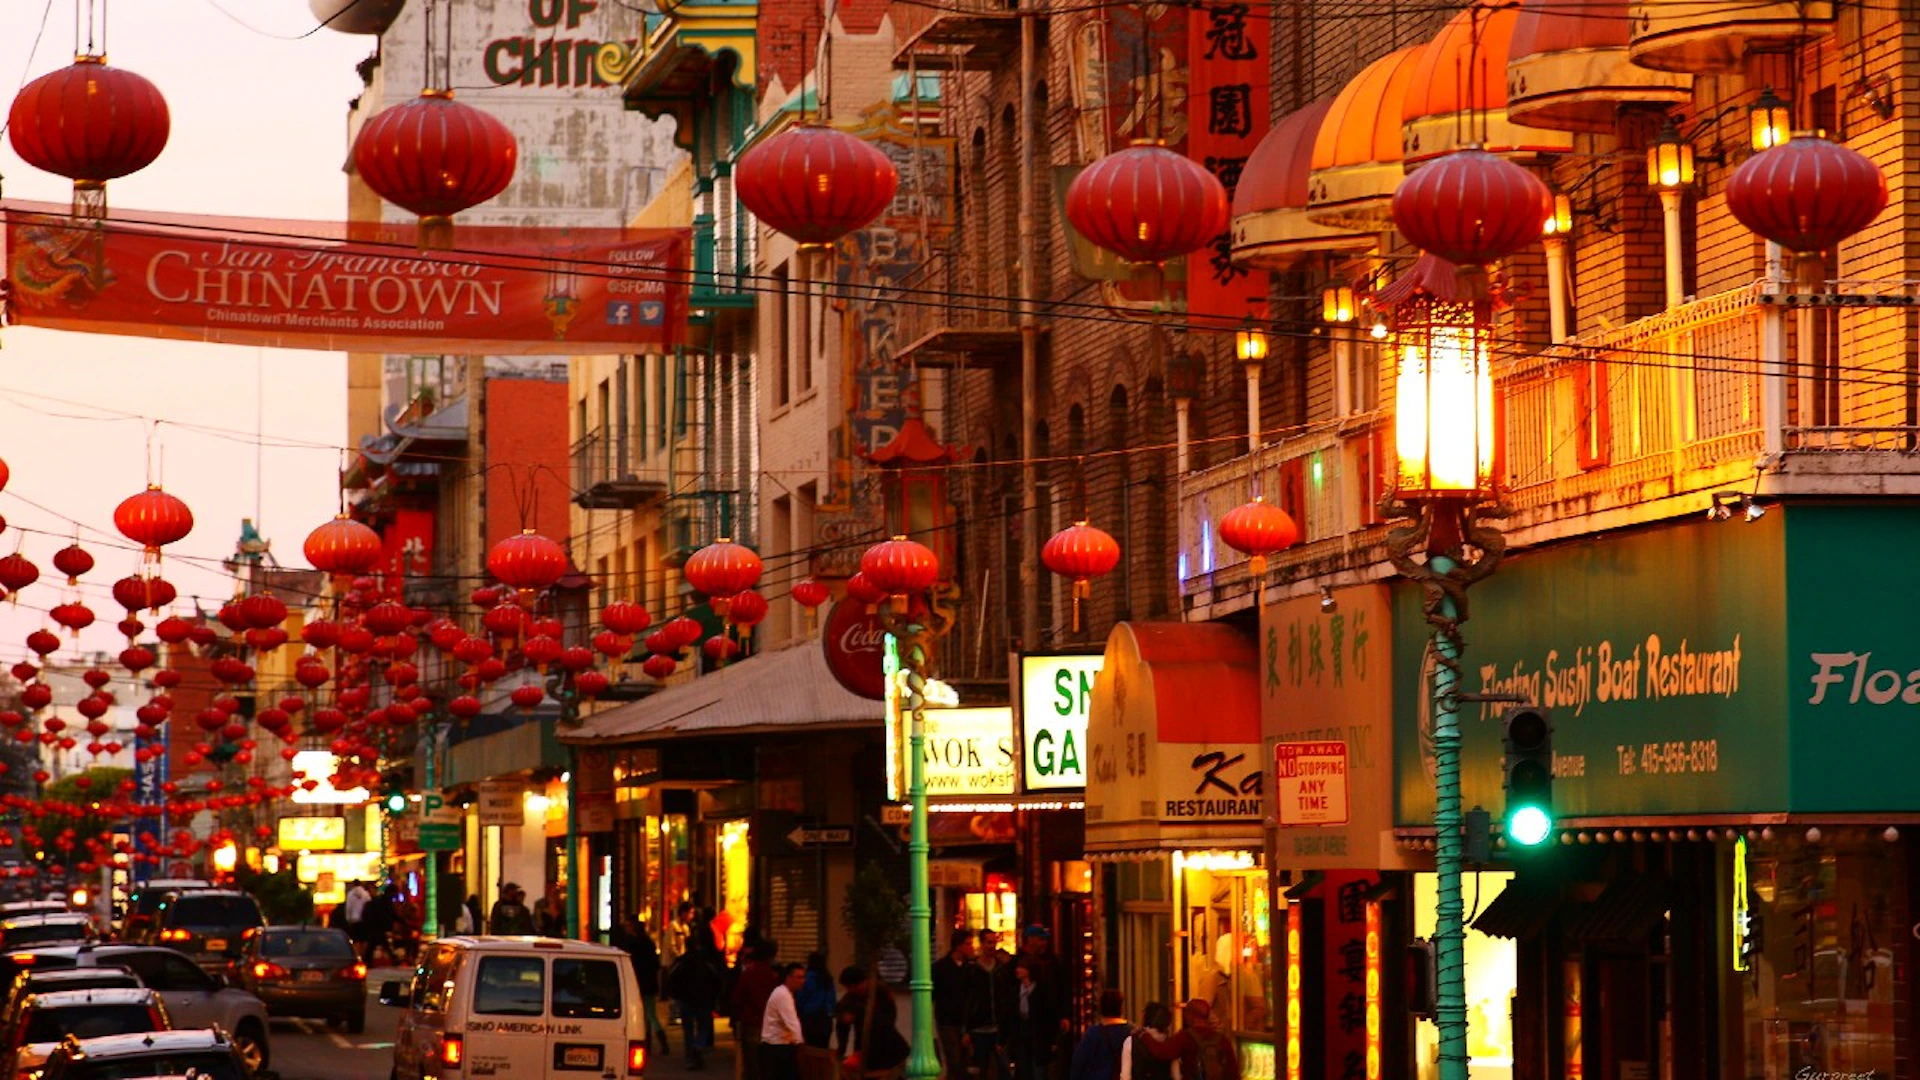 Chinatown in the Evening